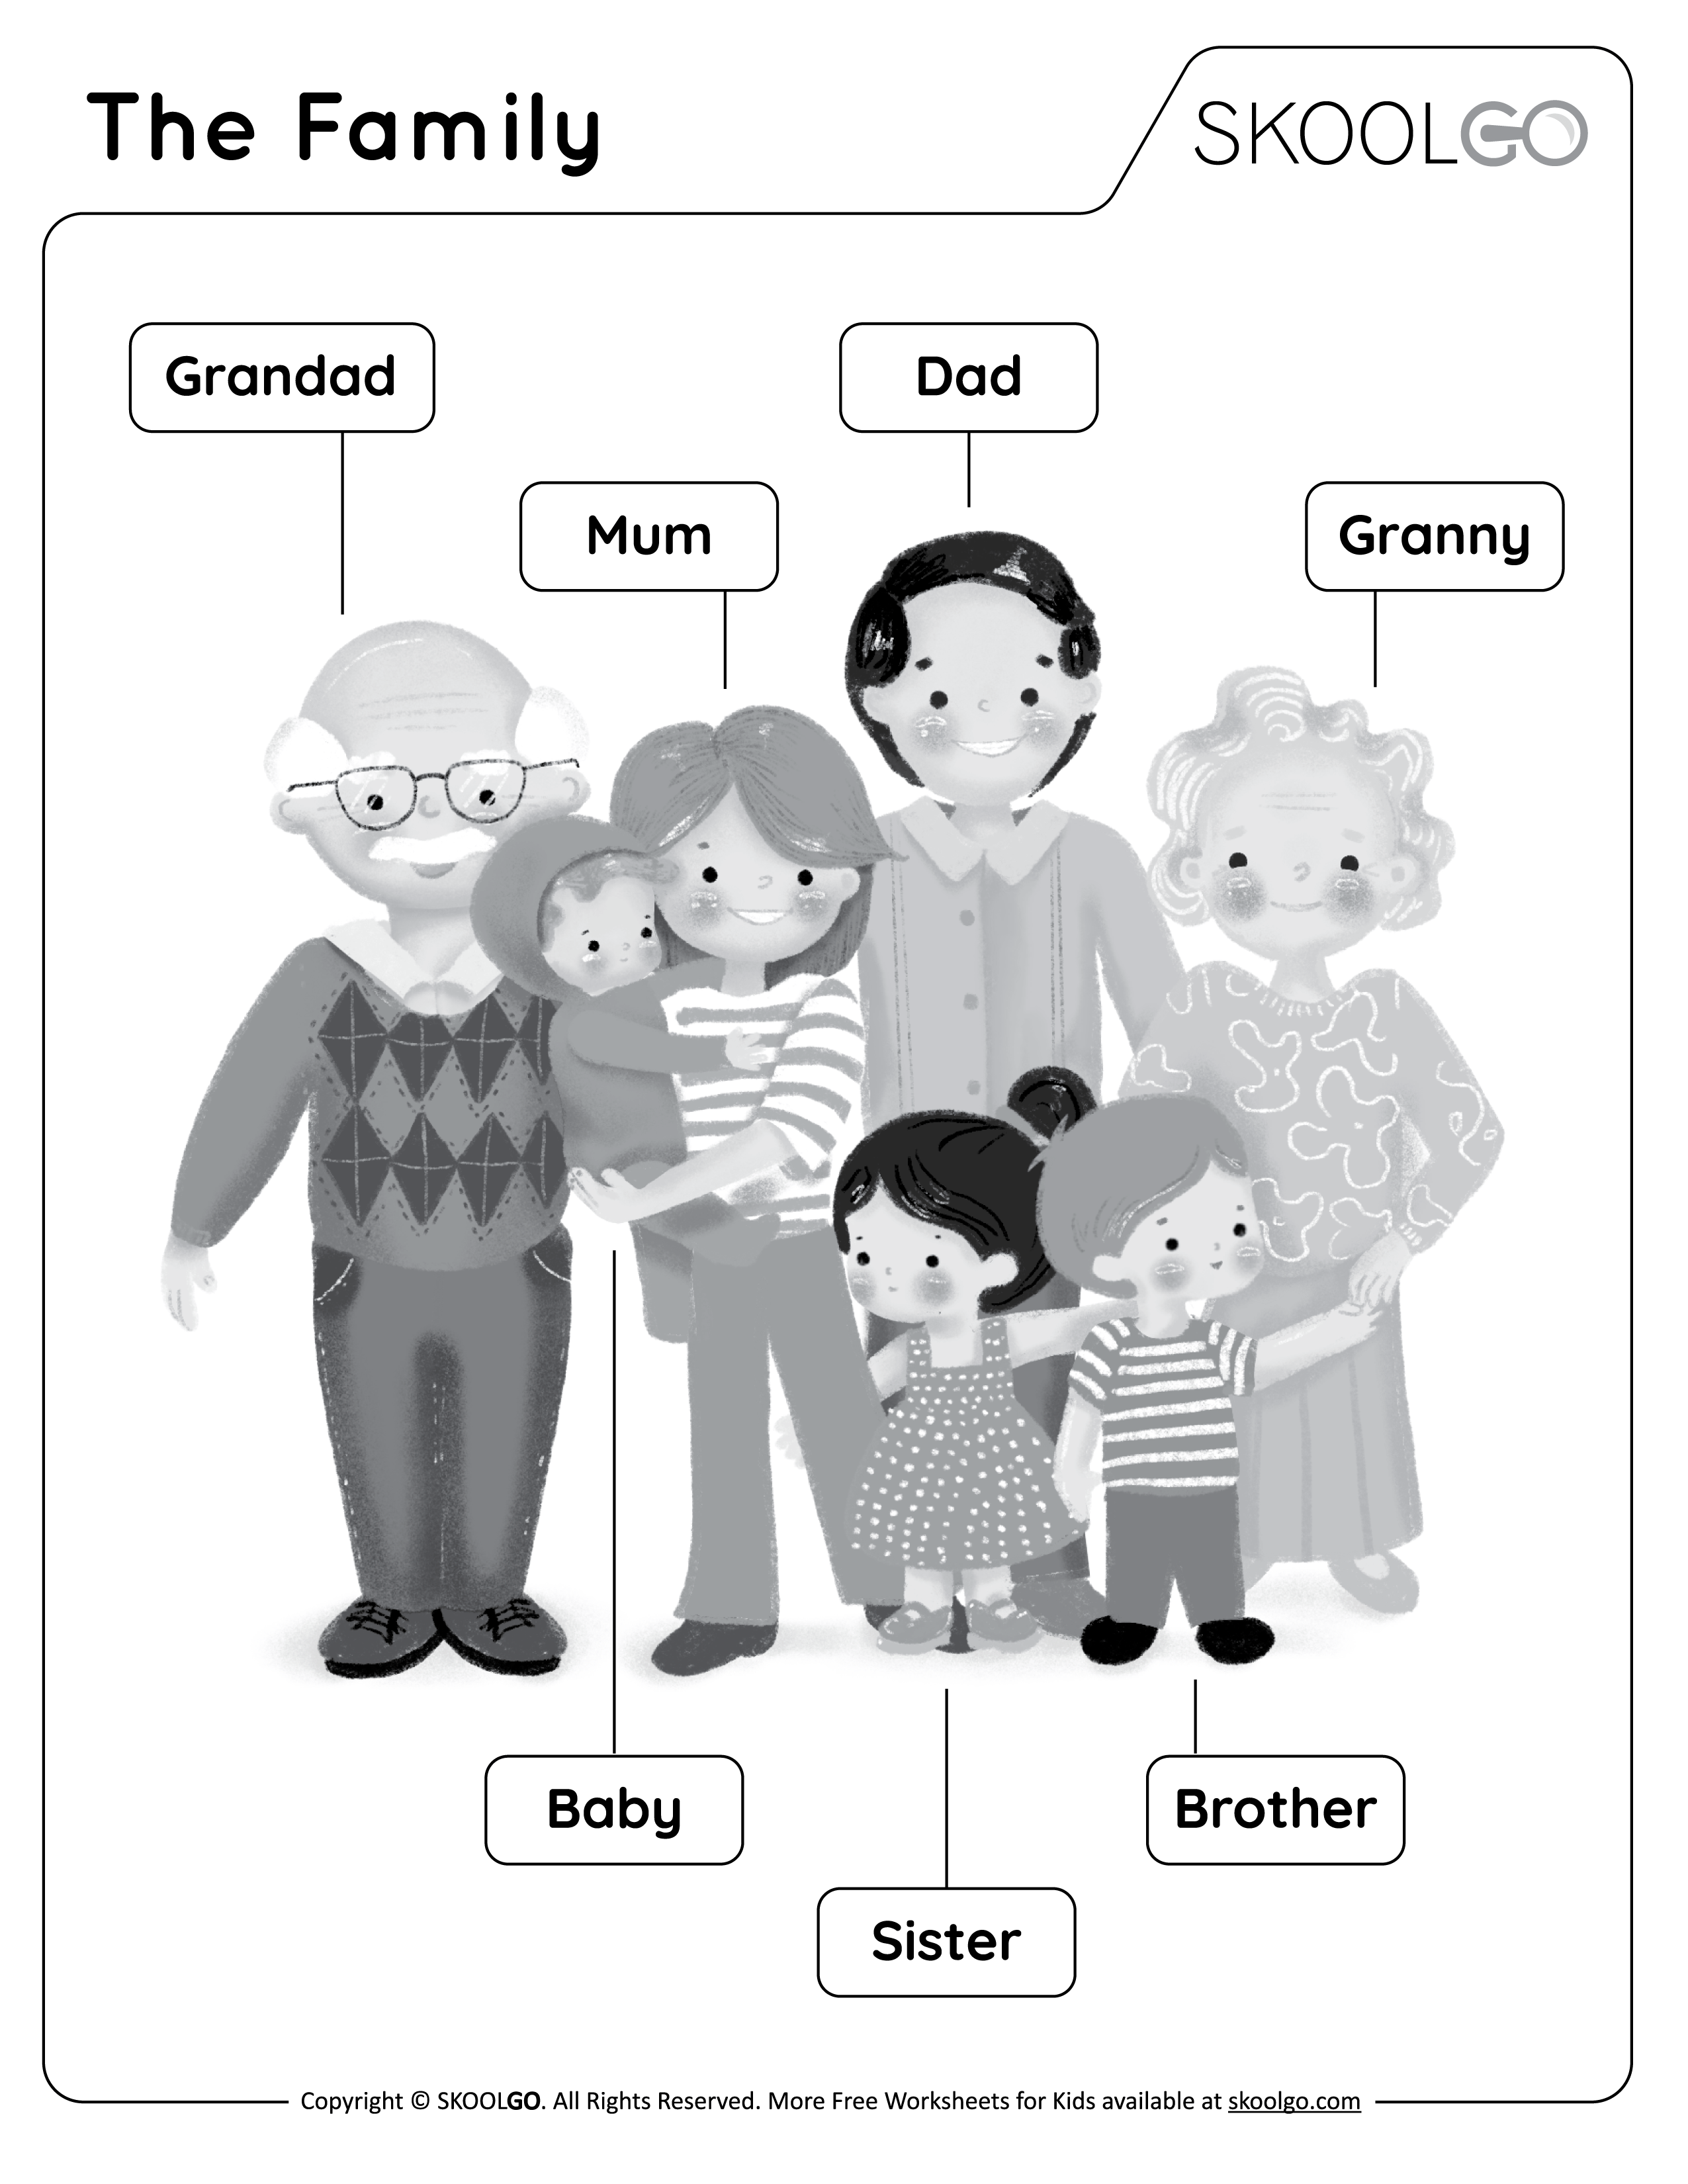 The Family - Free Black and White Worksheet for Kids